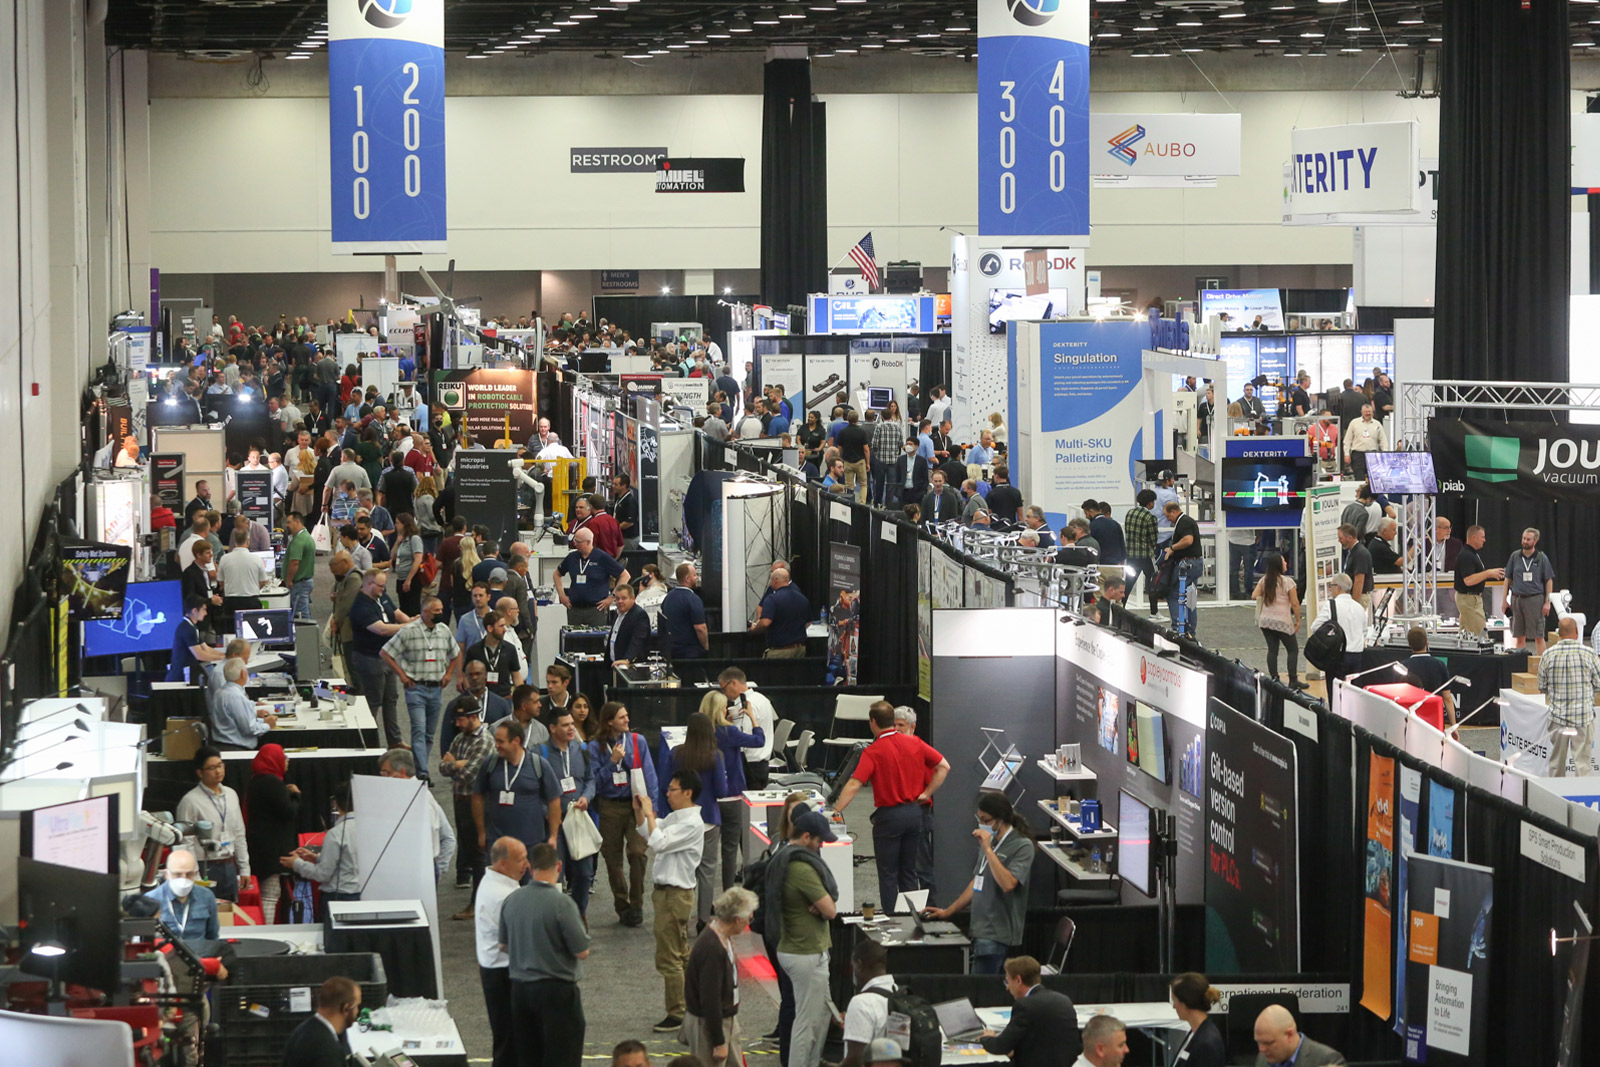 Exhibitor Resources Automate 2023